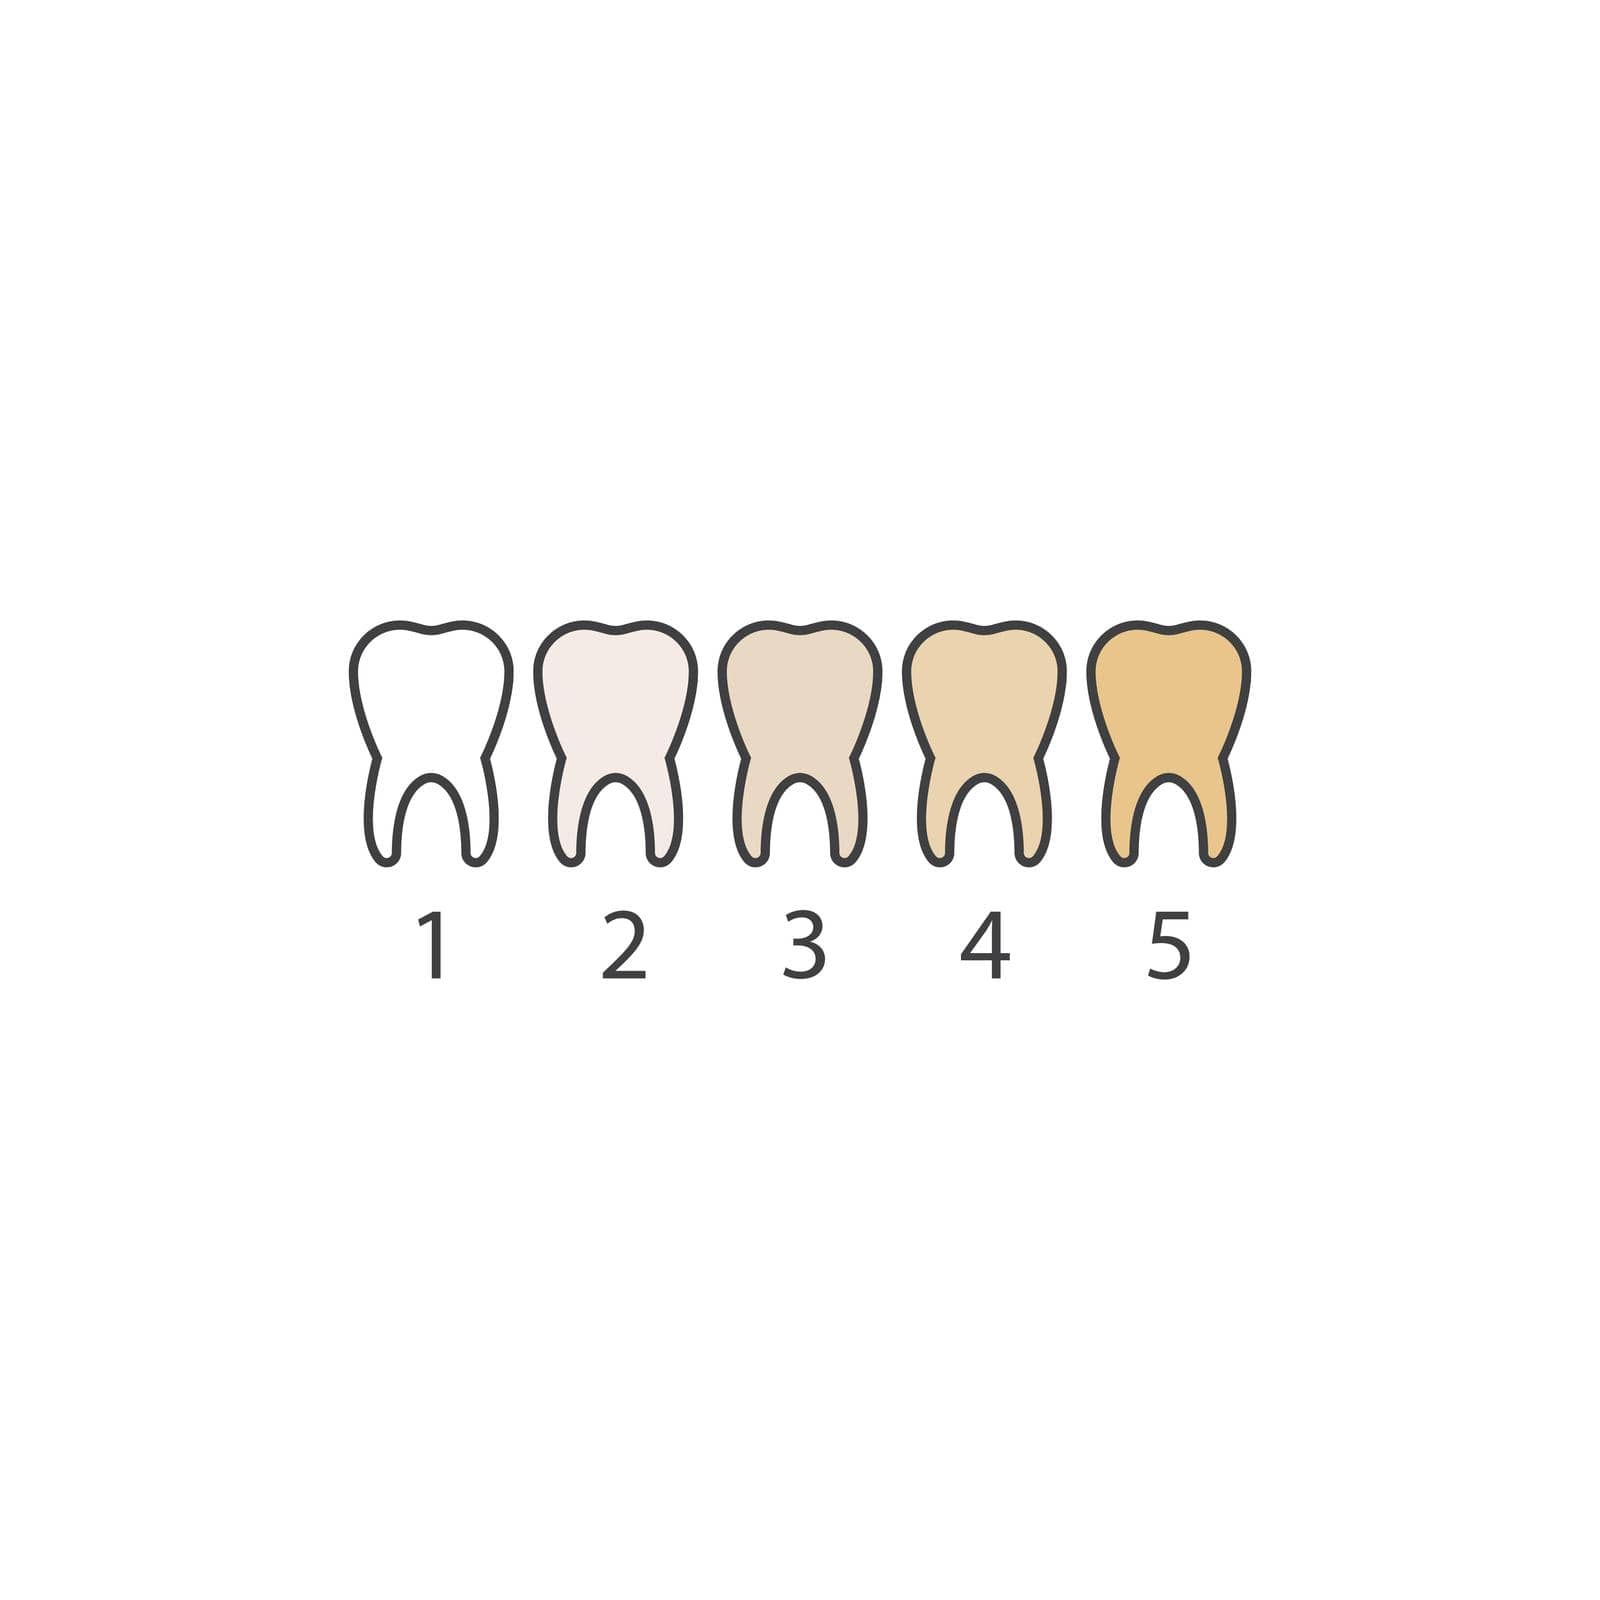 tooth color level vector illustration by idan